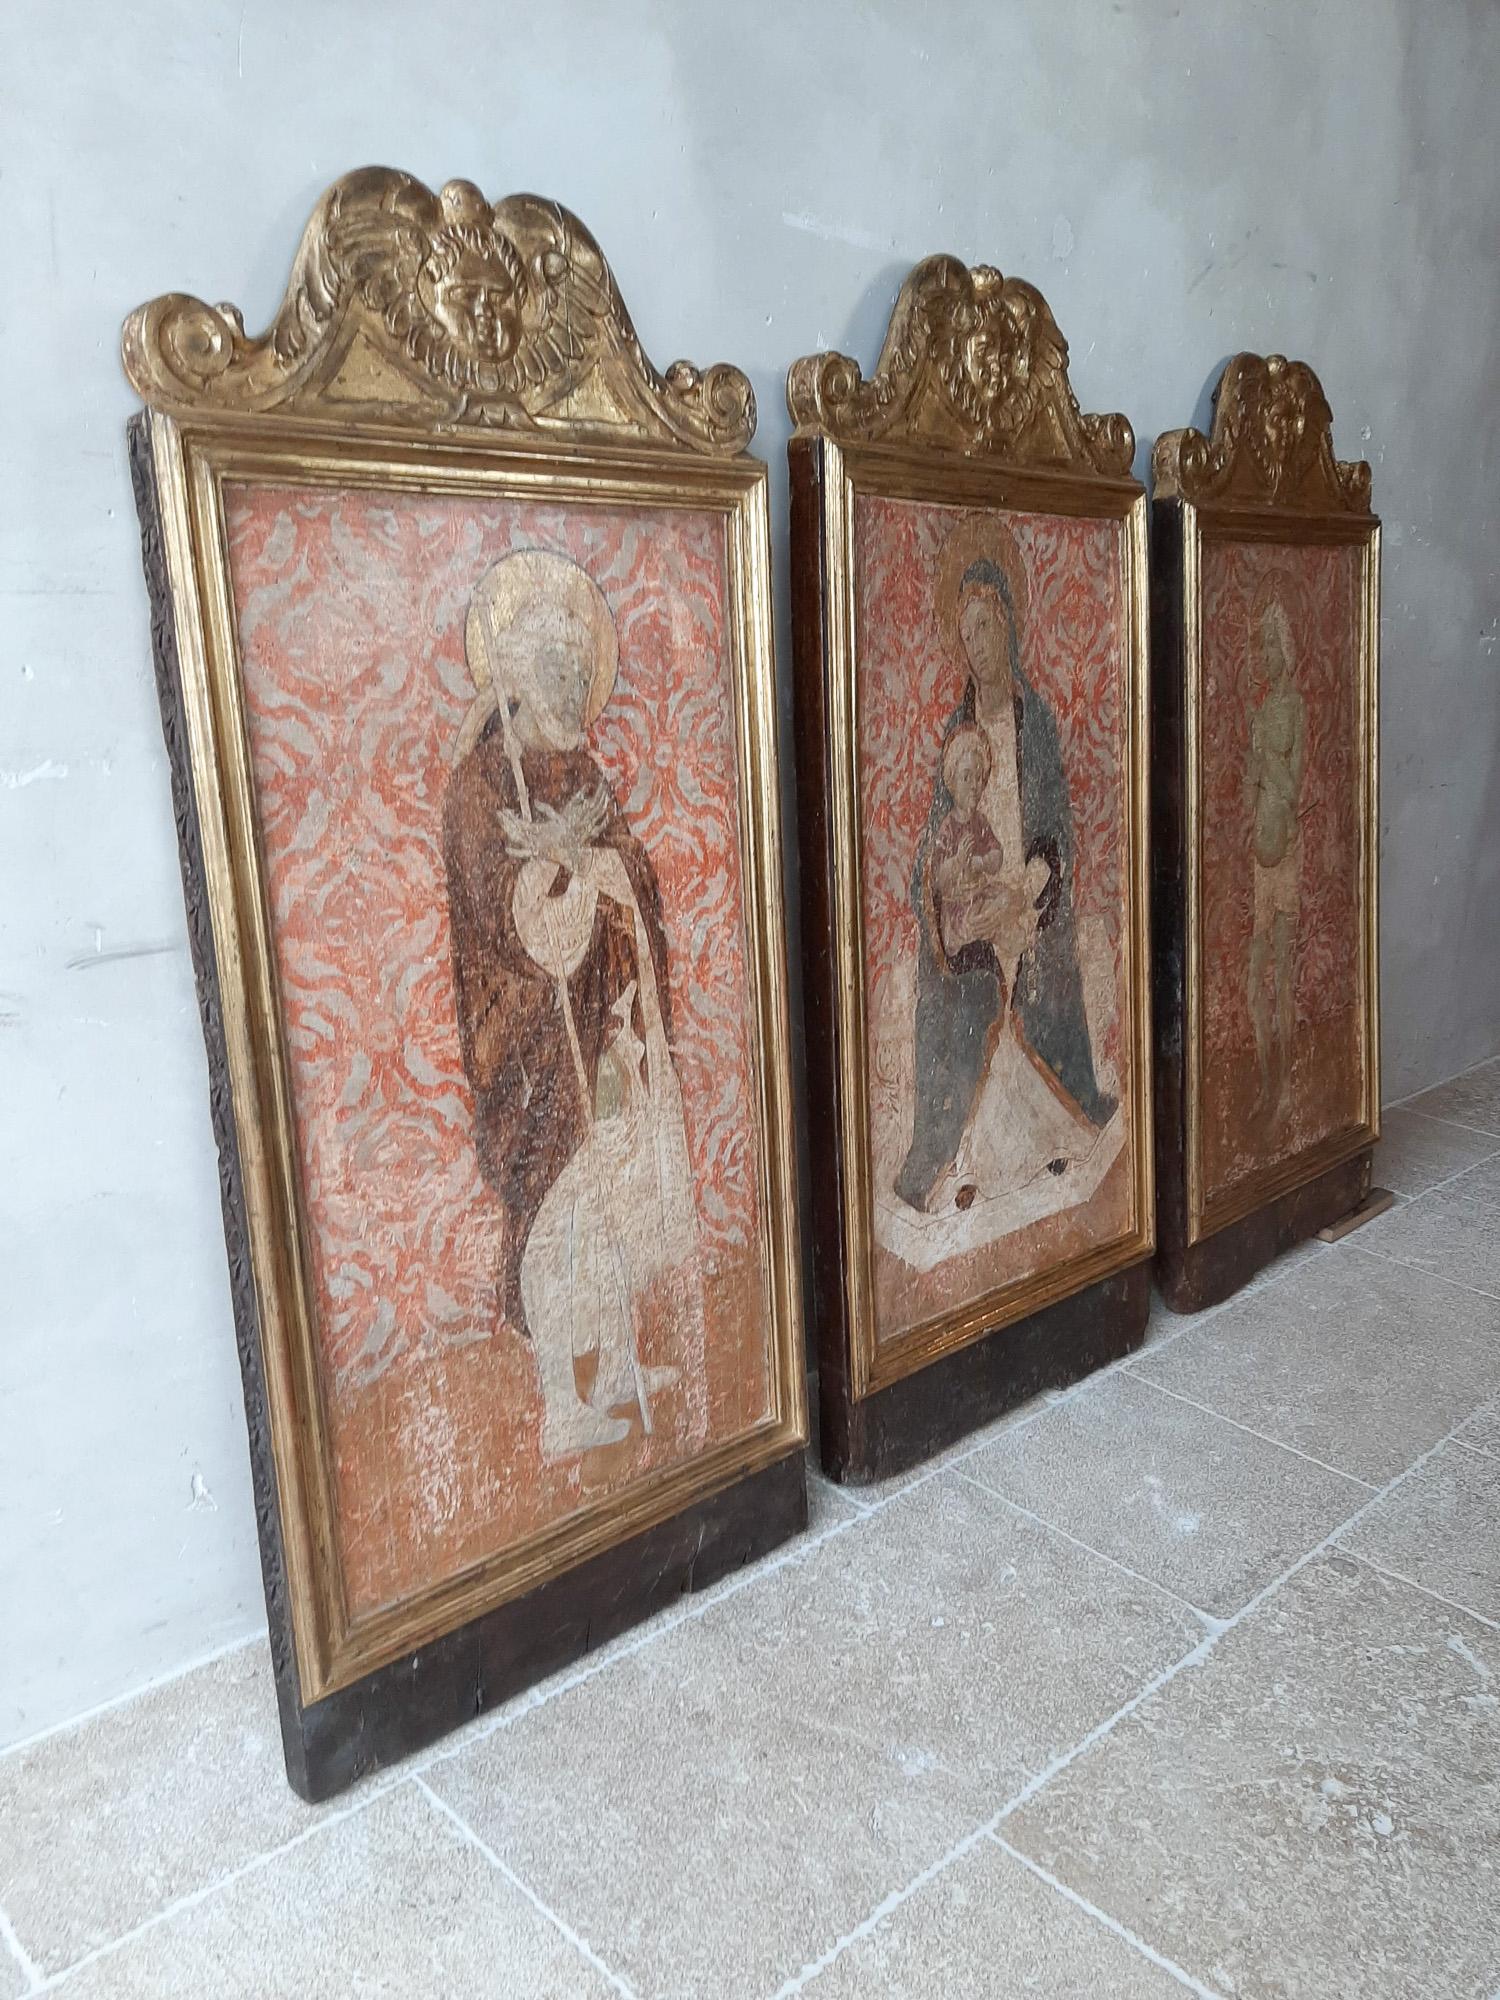 Triptych with Fresco on Walnut from the 14th to 15th Century, Siena, Italy 6